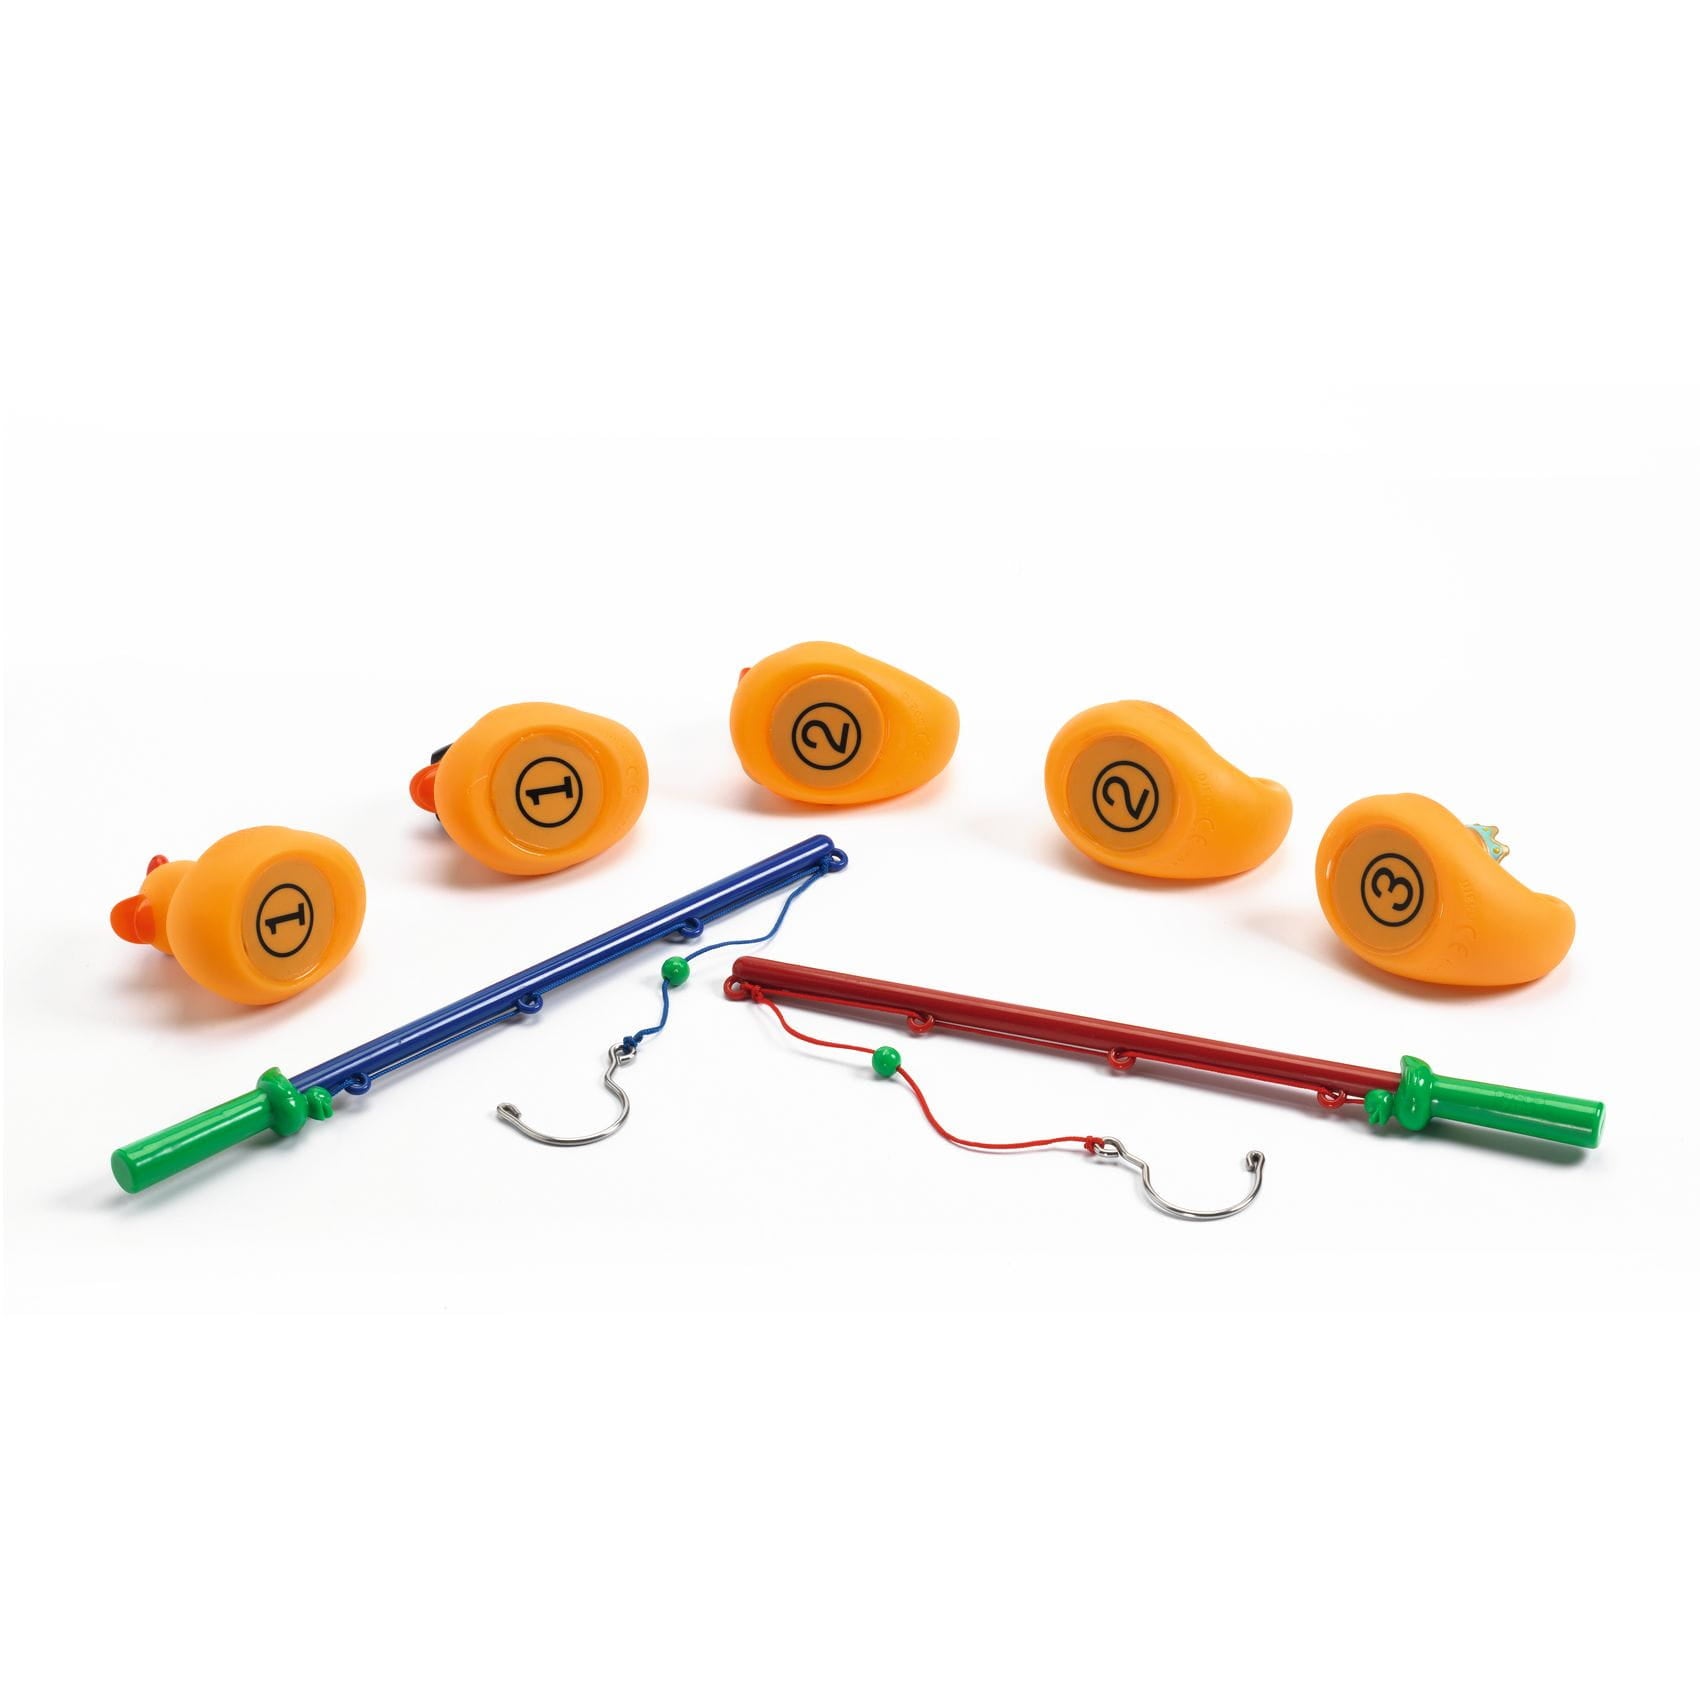 Djeco: A dexterity game with hook fishing yellow